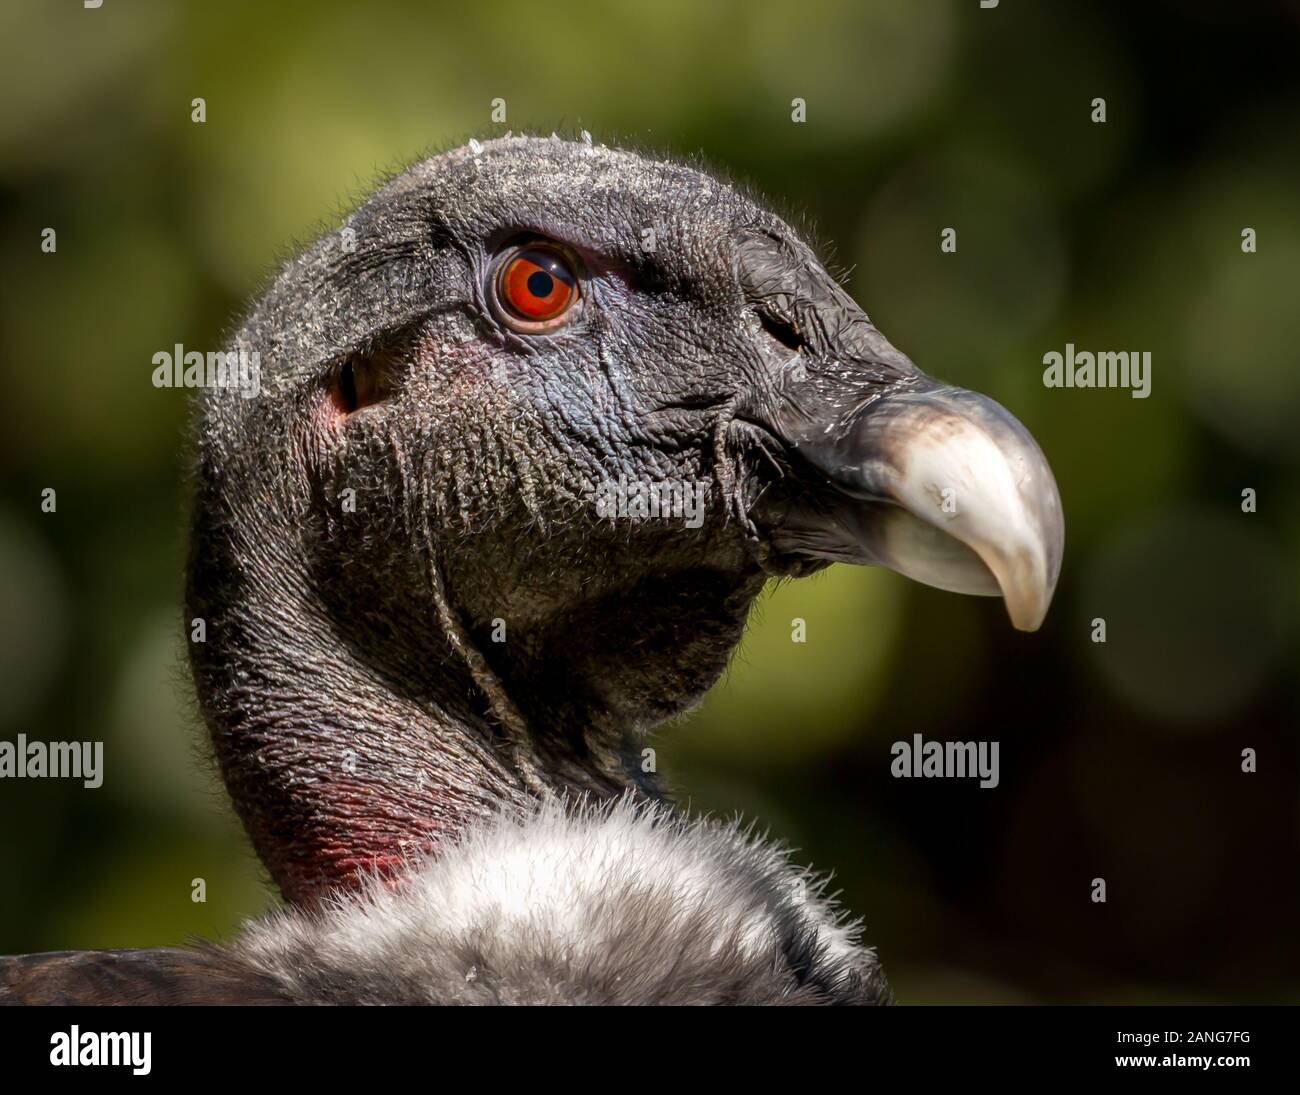 Headshot of an Andean Condor, the biggest flying bird in the world. Wingspan can be over 10ft! Stock Photo